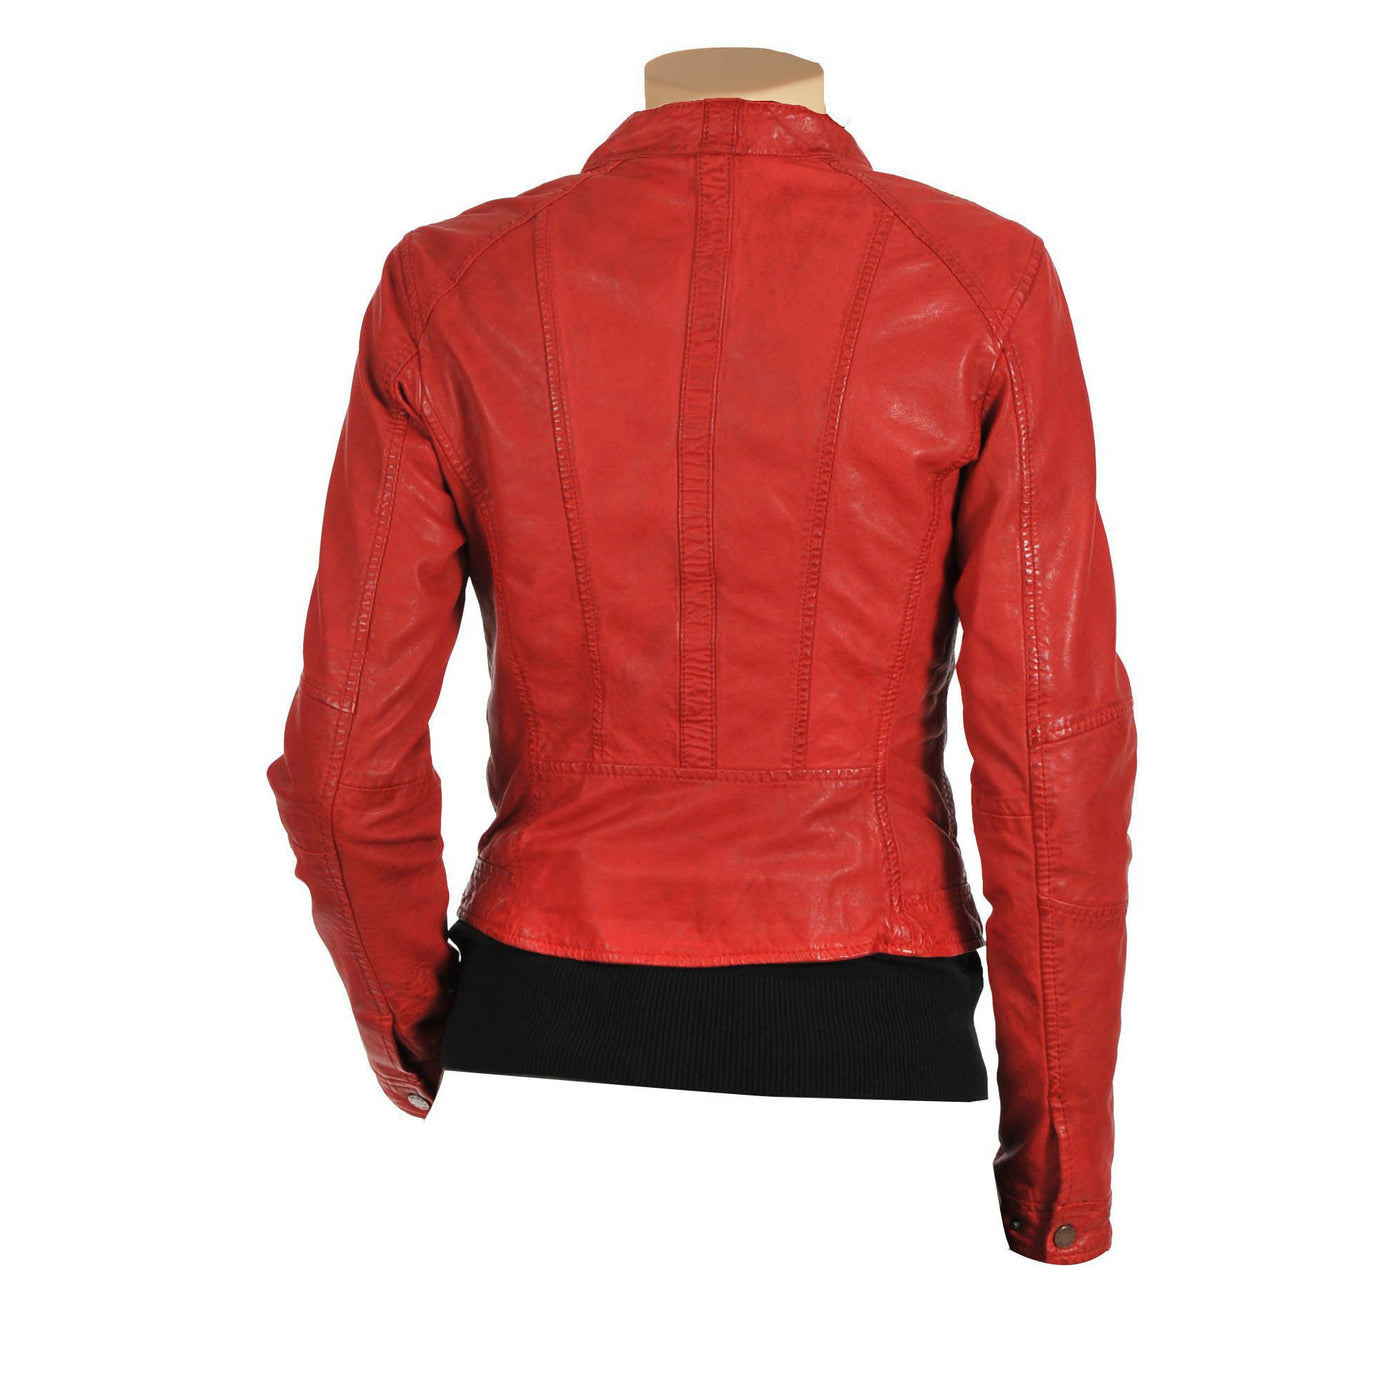 Women's Red moto style leather jacket - Lusso Leather - 2